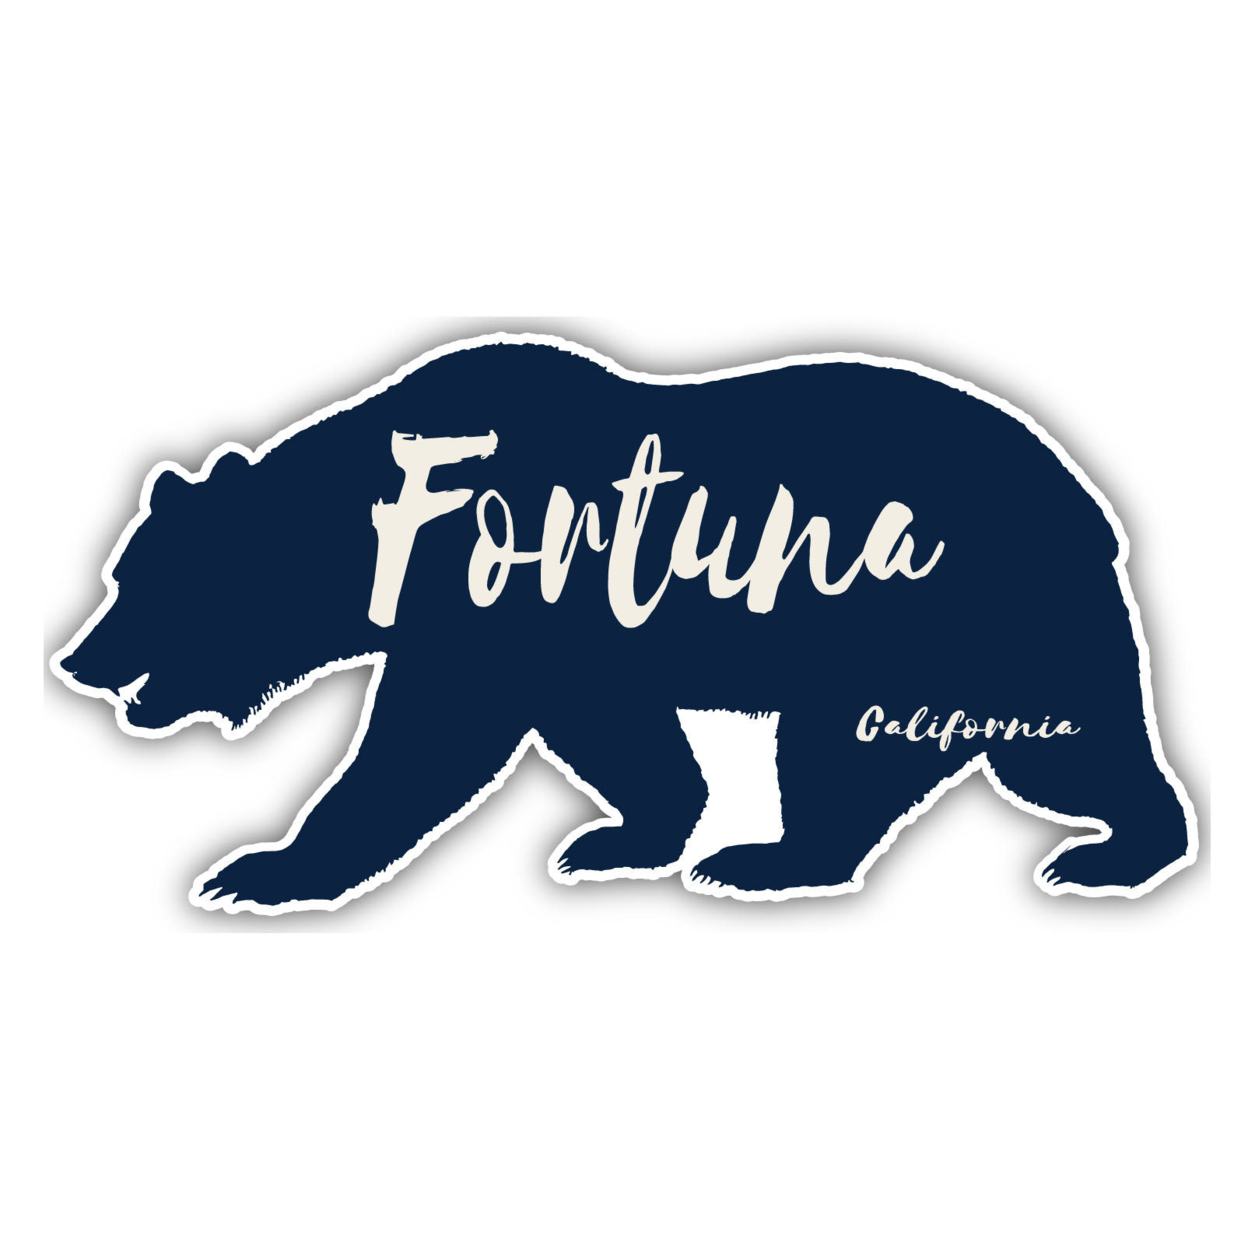 Fortuna California Souvenir Decorative Stickers (Choose Theme And Size) - 4-Pack, 10-Inch, Tent